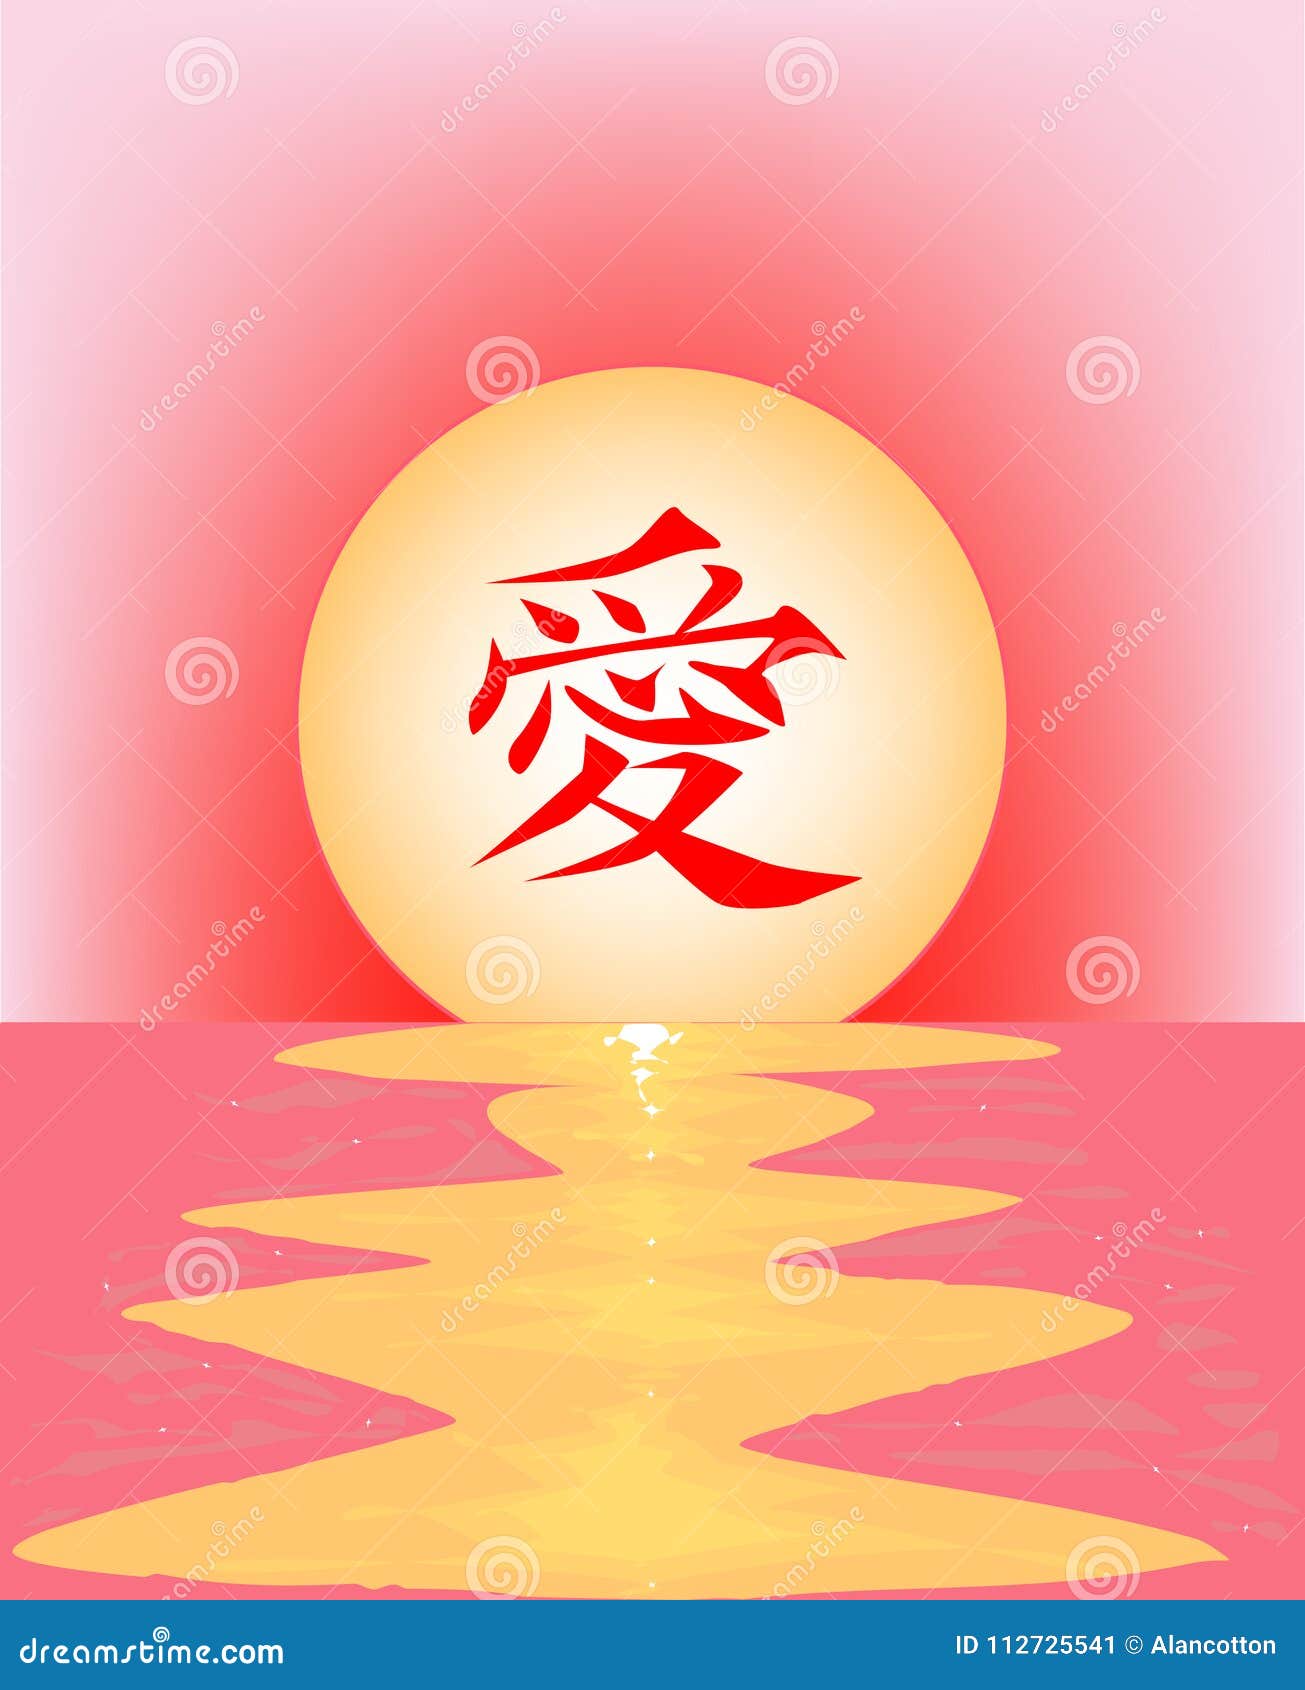 Chinese Love Symbol in 3D stock vector. Illustration of eastern - 235162713